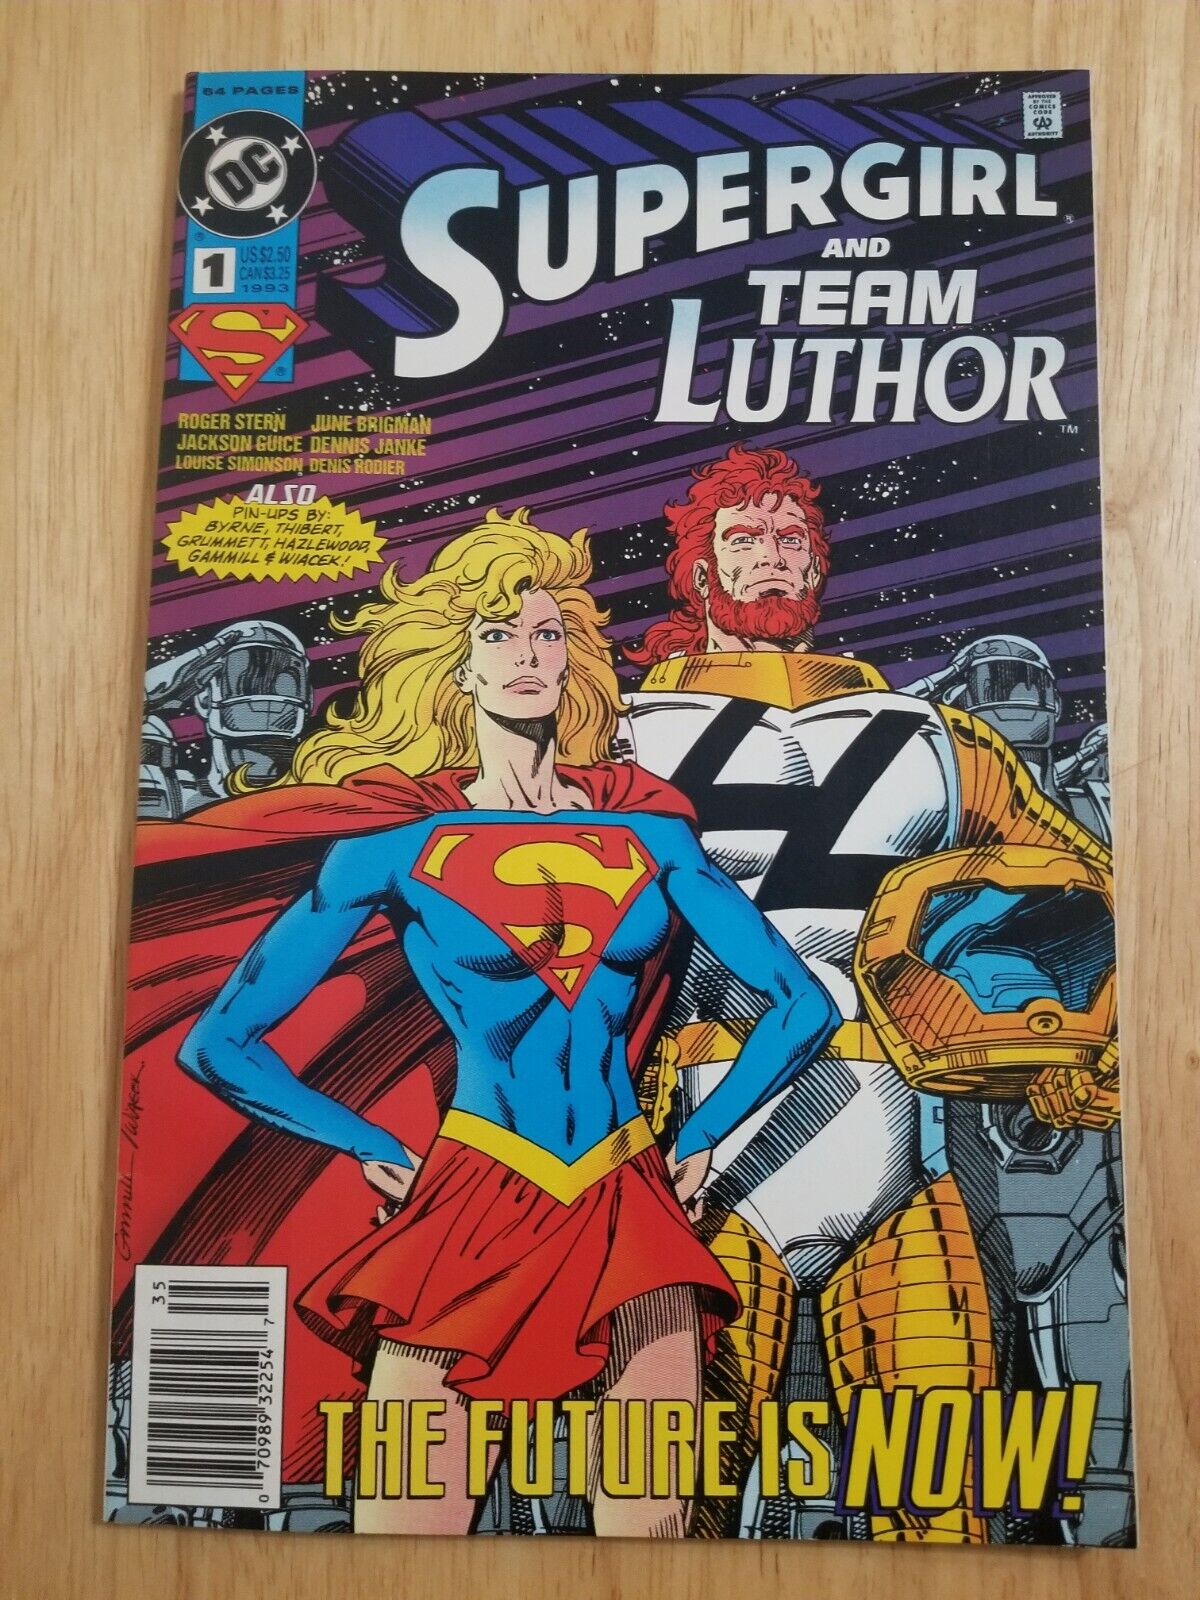 Supergirl and Team Luthor #1 The Future Is Now 1993 DC Comics Gammill Wiacek